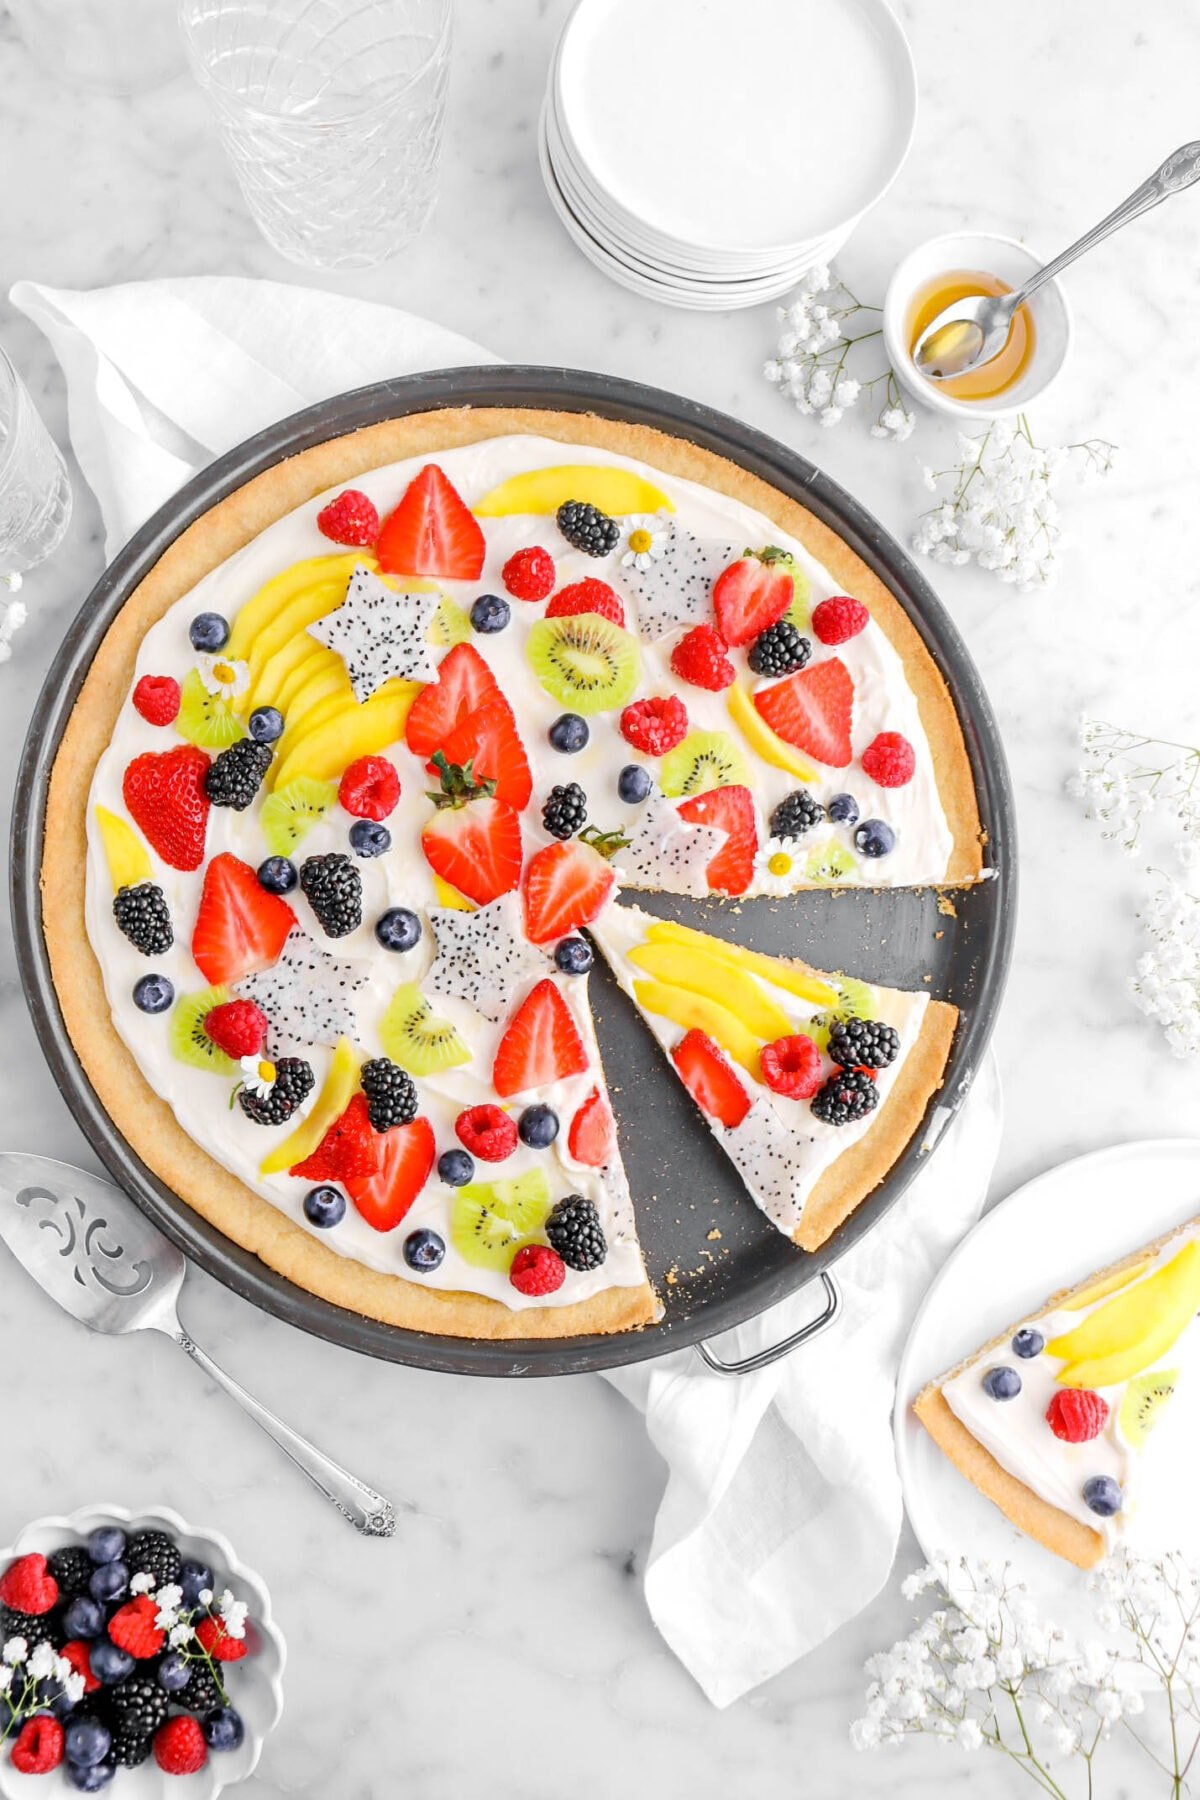 fruit pizza with slice cut into it in black pizza pan with white plate with another slice of pizza beside with bowl of berries and white flowers around.